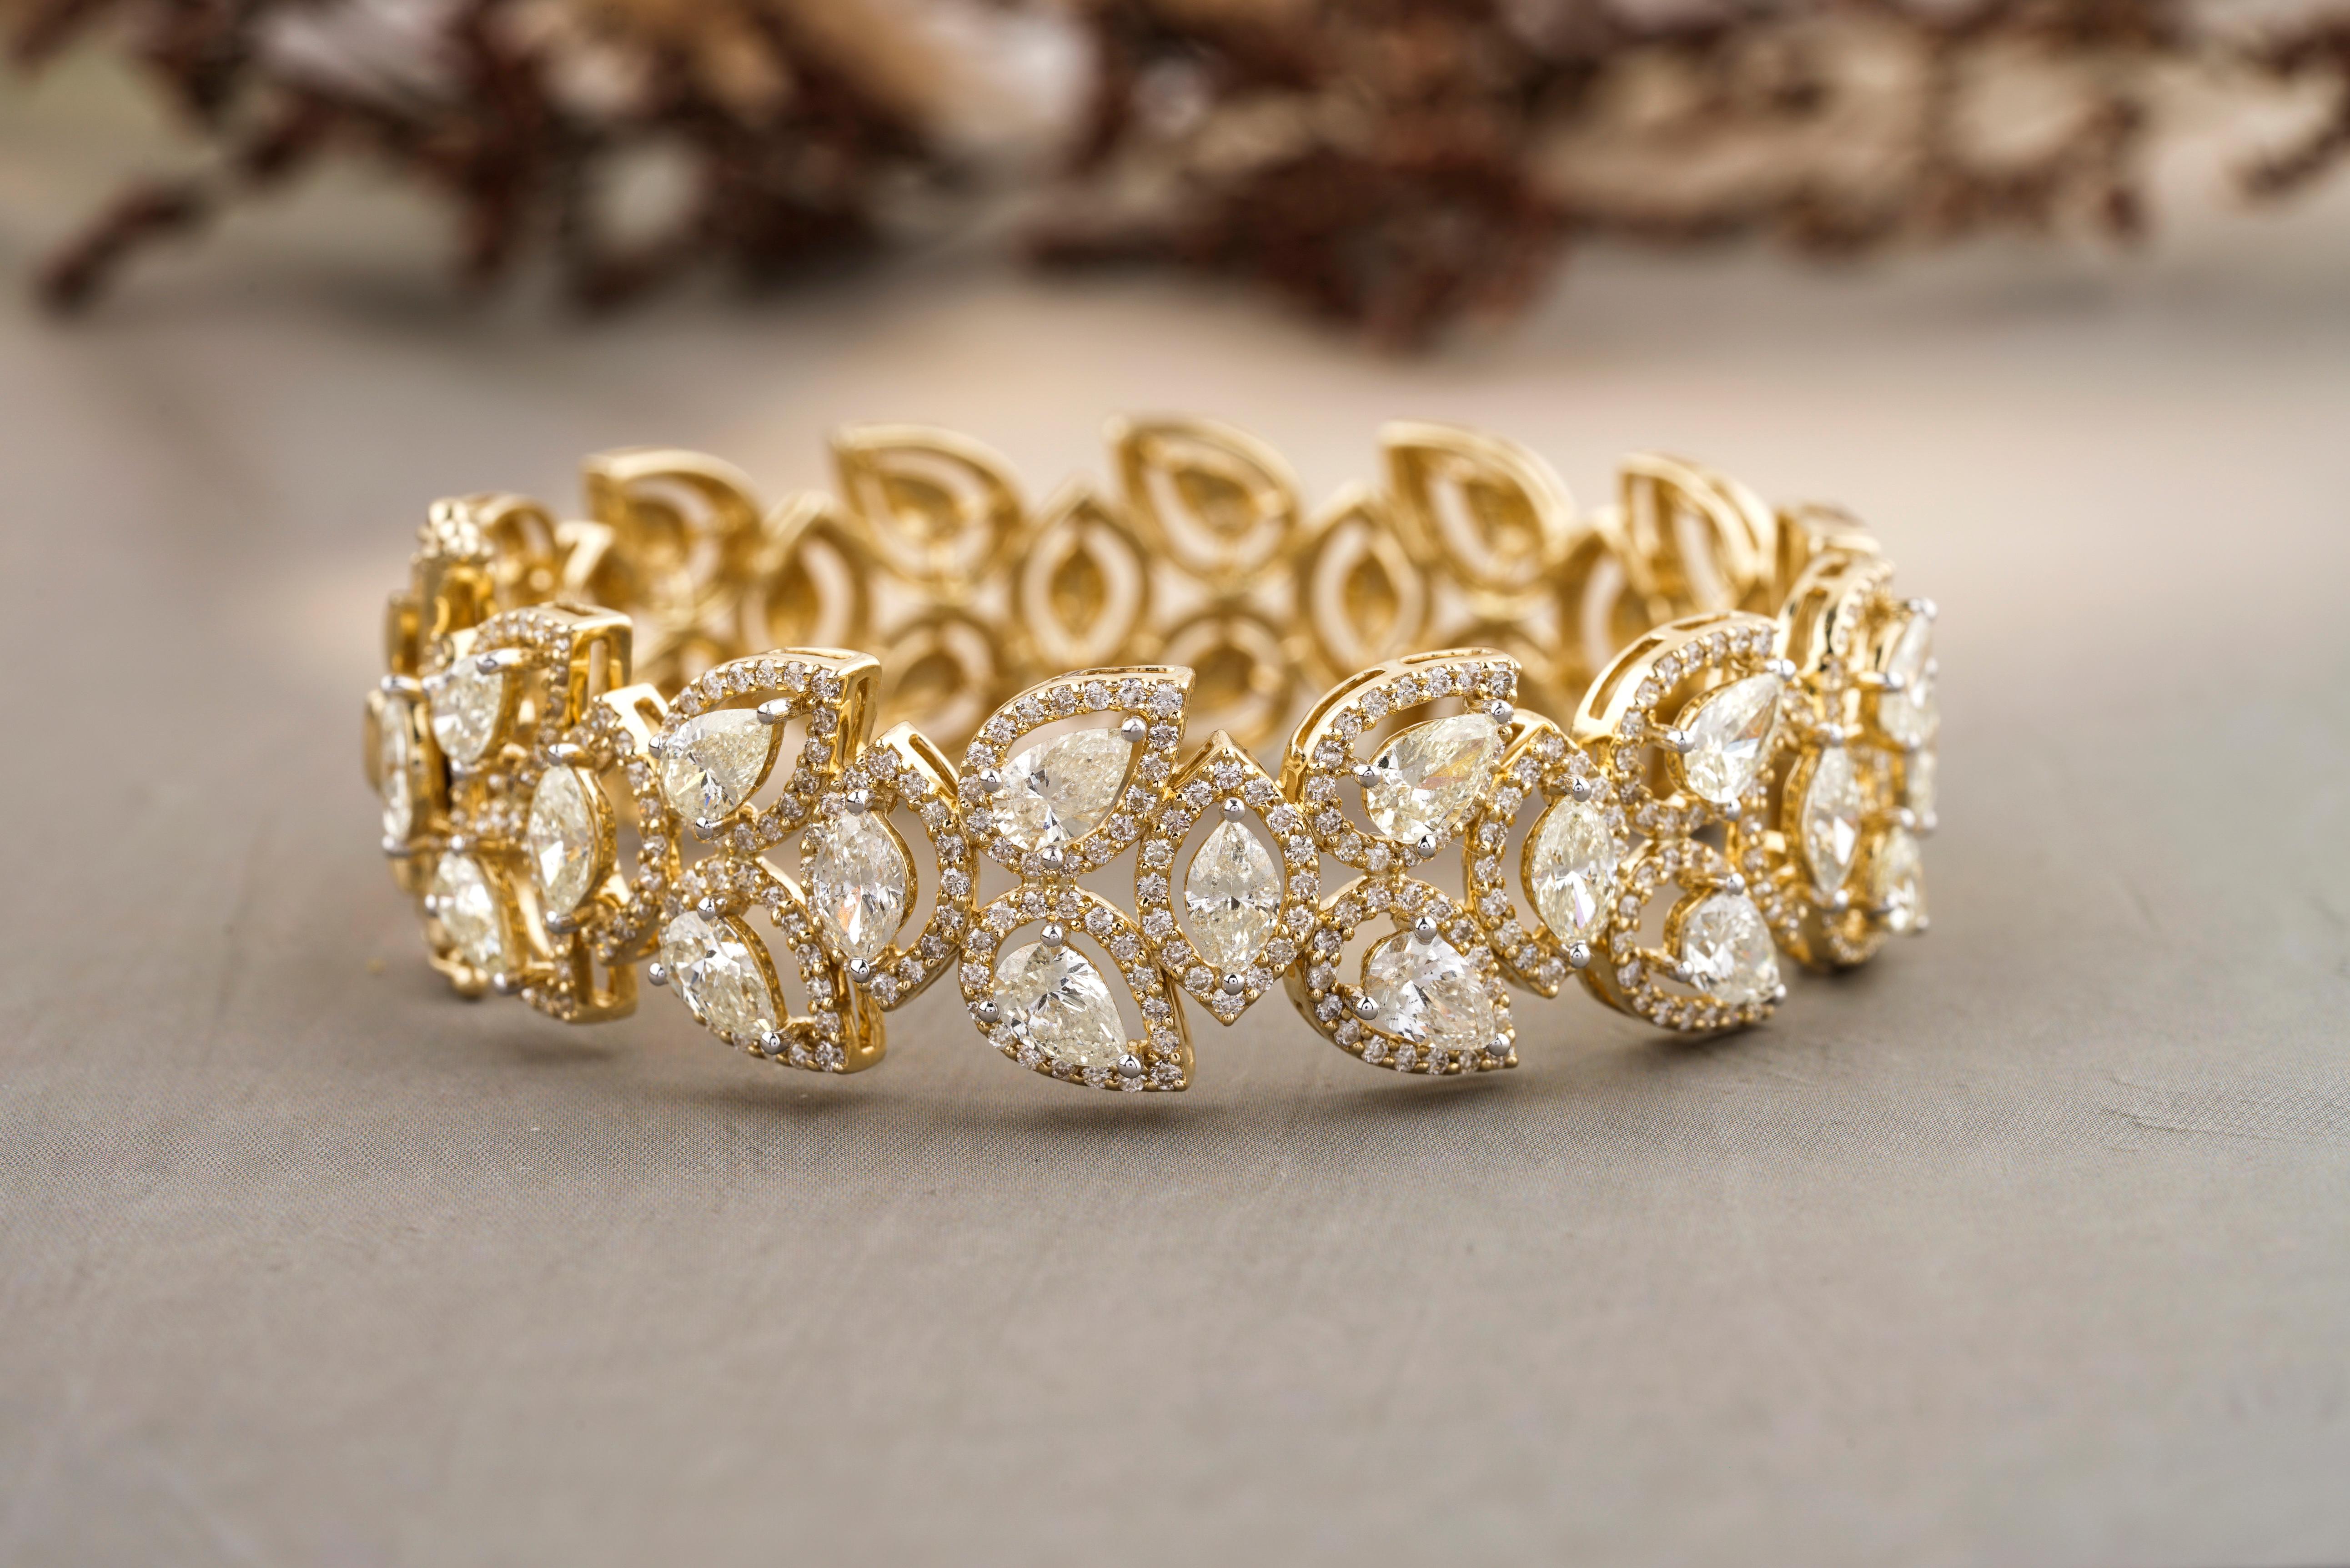 The Marquise & Pear Diamond Bracelet is a stunning piece of jewelry crafted from 18k solid gold. The bracelet features a unique design, incorporating marquise and pear-shaped diamonds in a floral pattern. The diamonds are carefully set within the